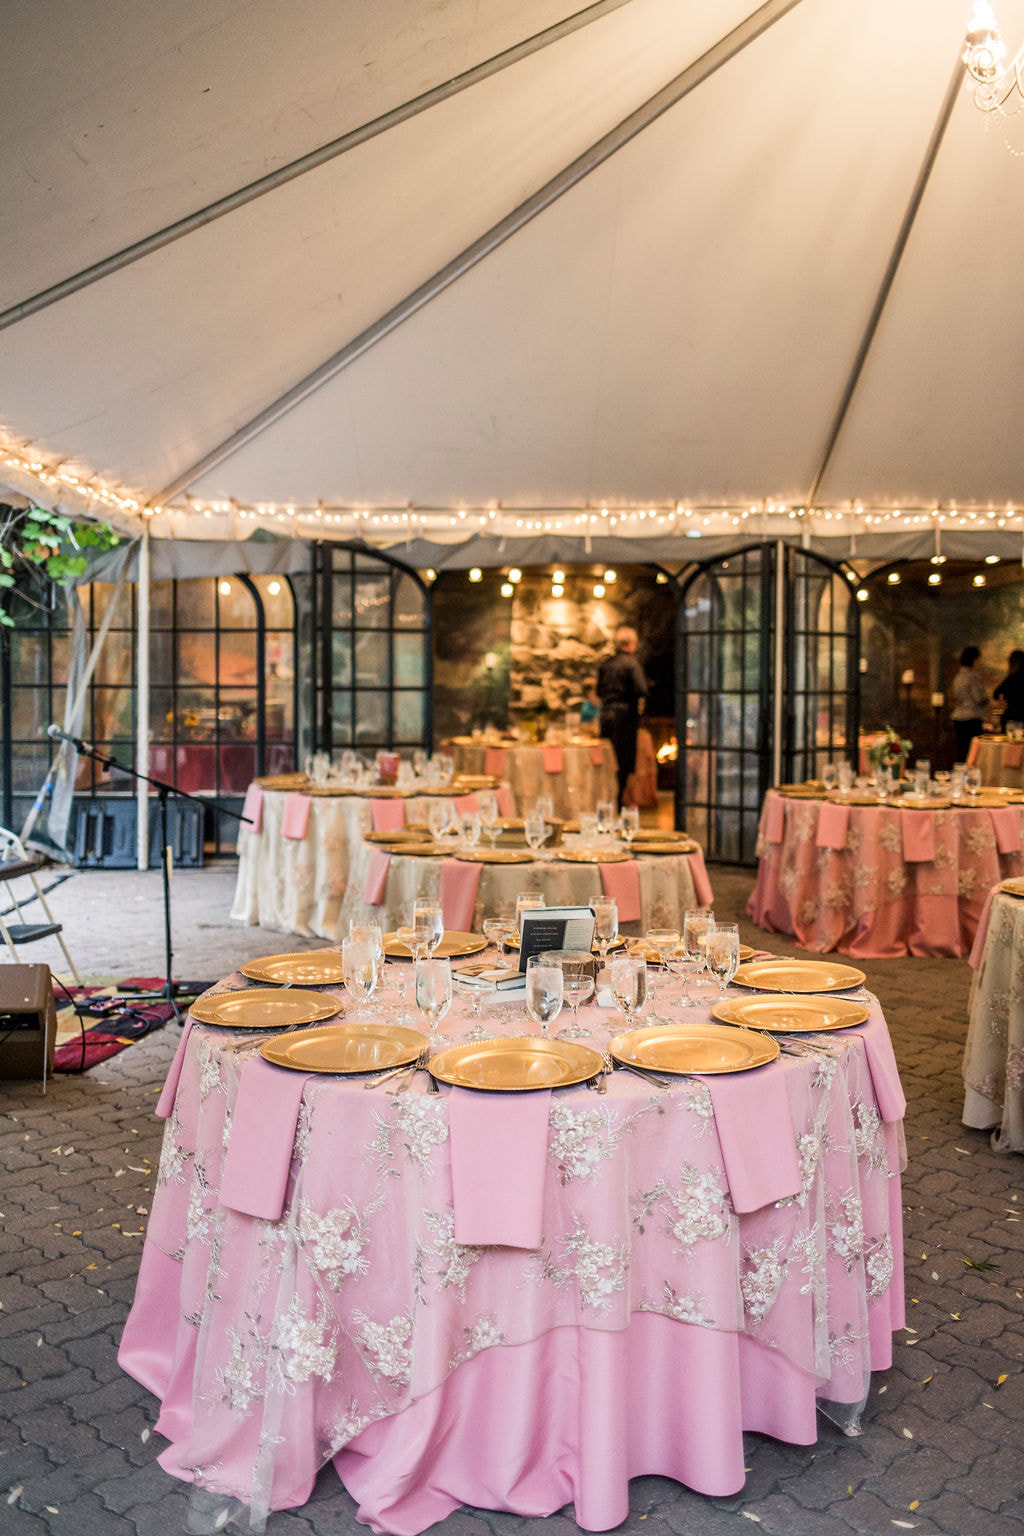 pink tablecloth with beaded overlay with gold chargers at place settings for wedding reception